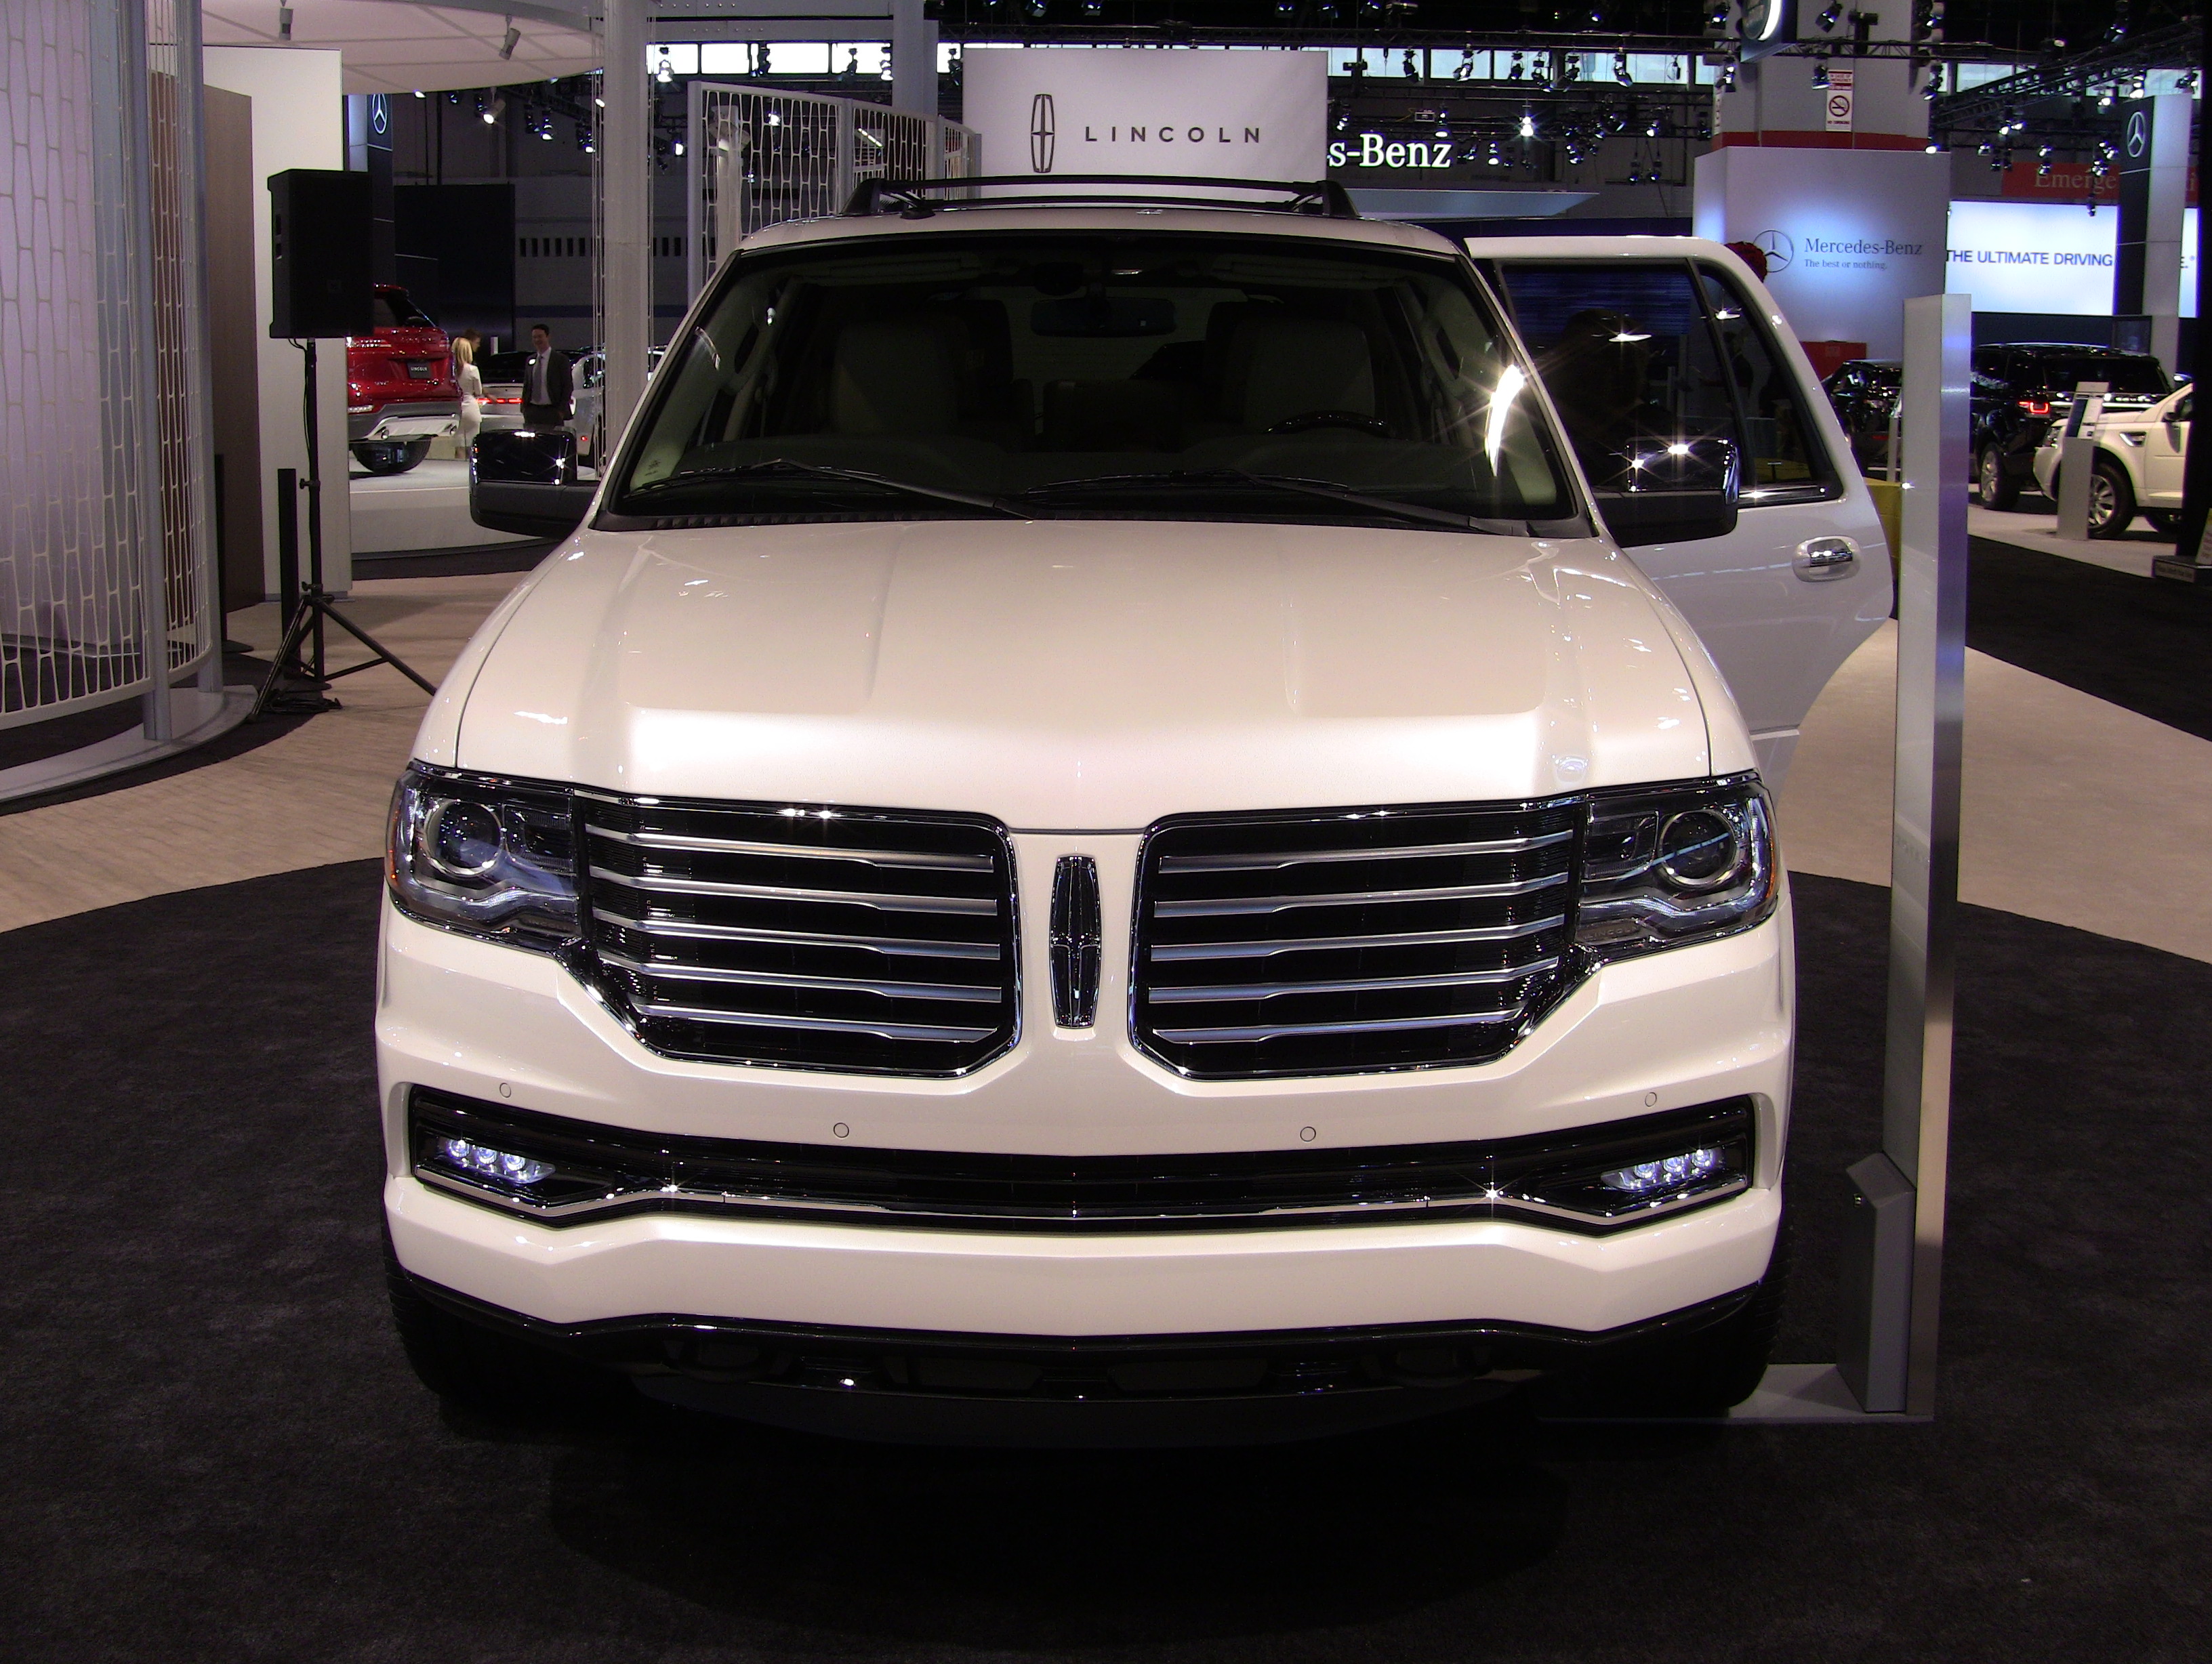 Will The 2015 Lincoln Navigator Have The Punch To Take On